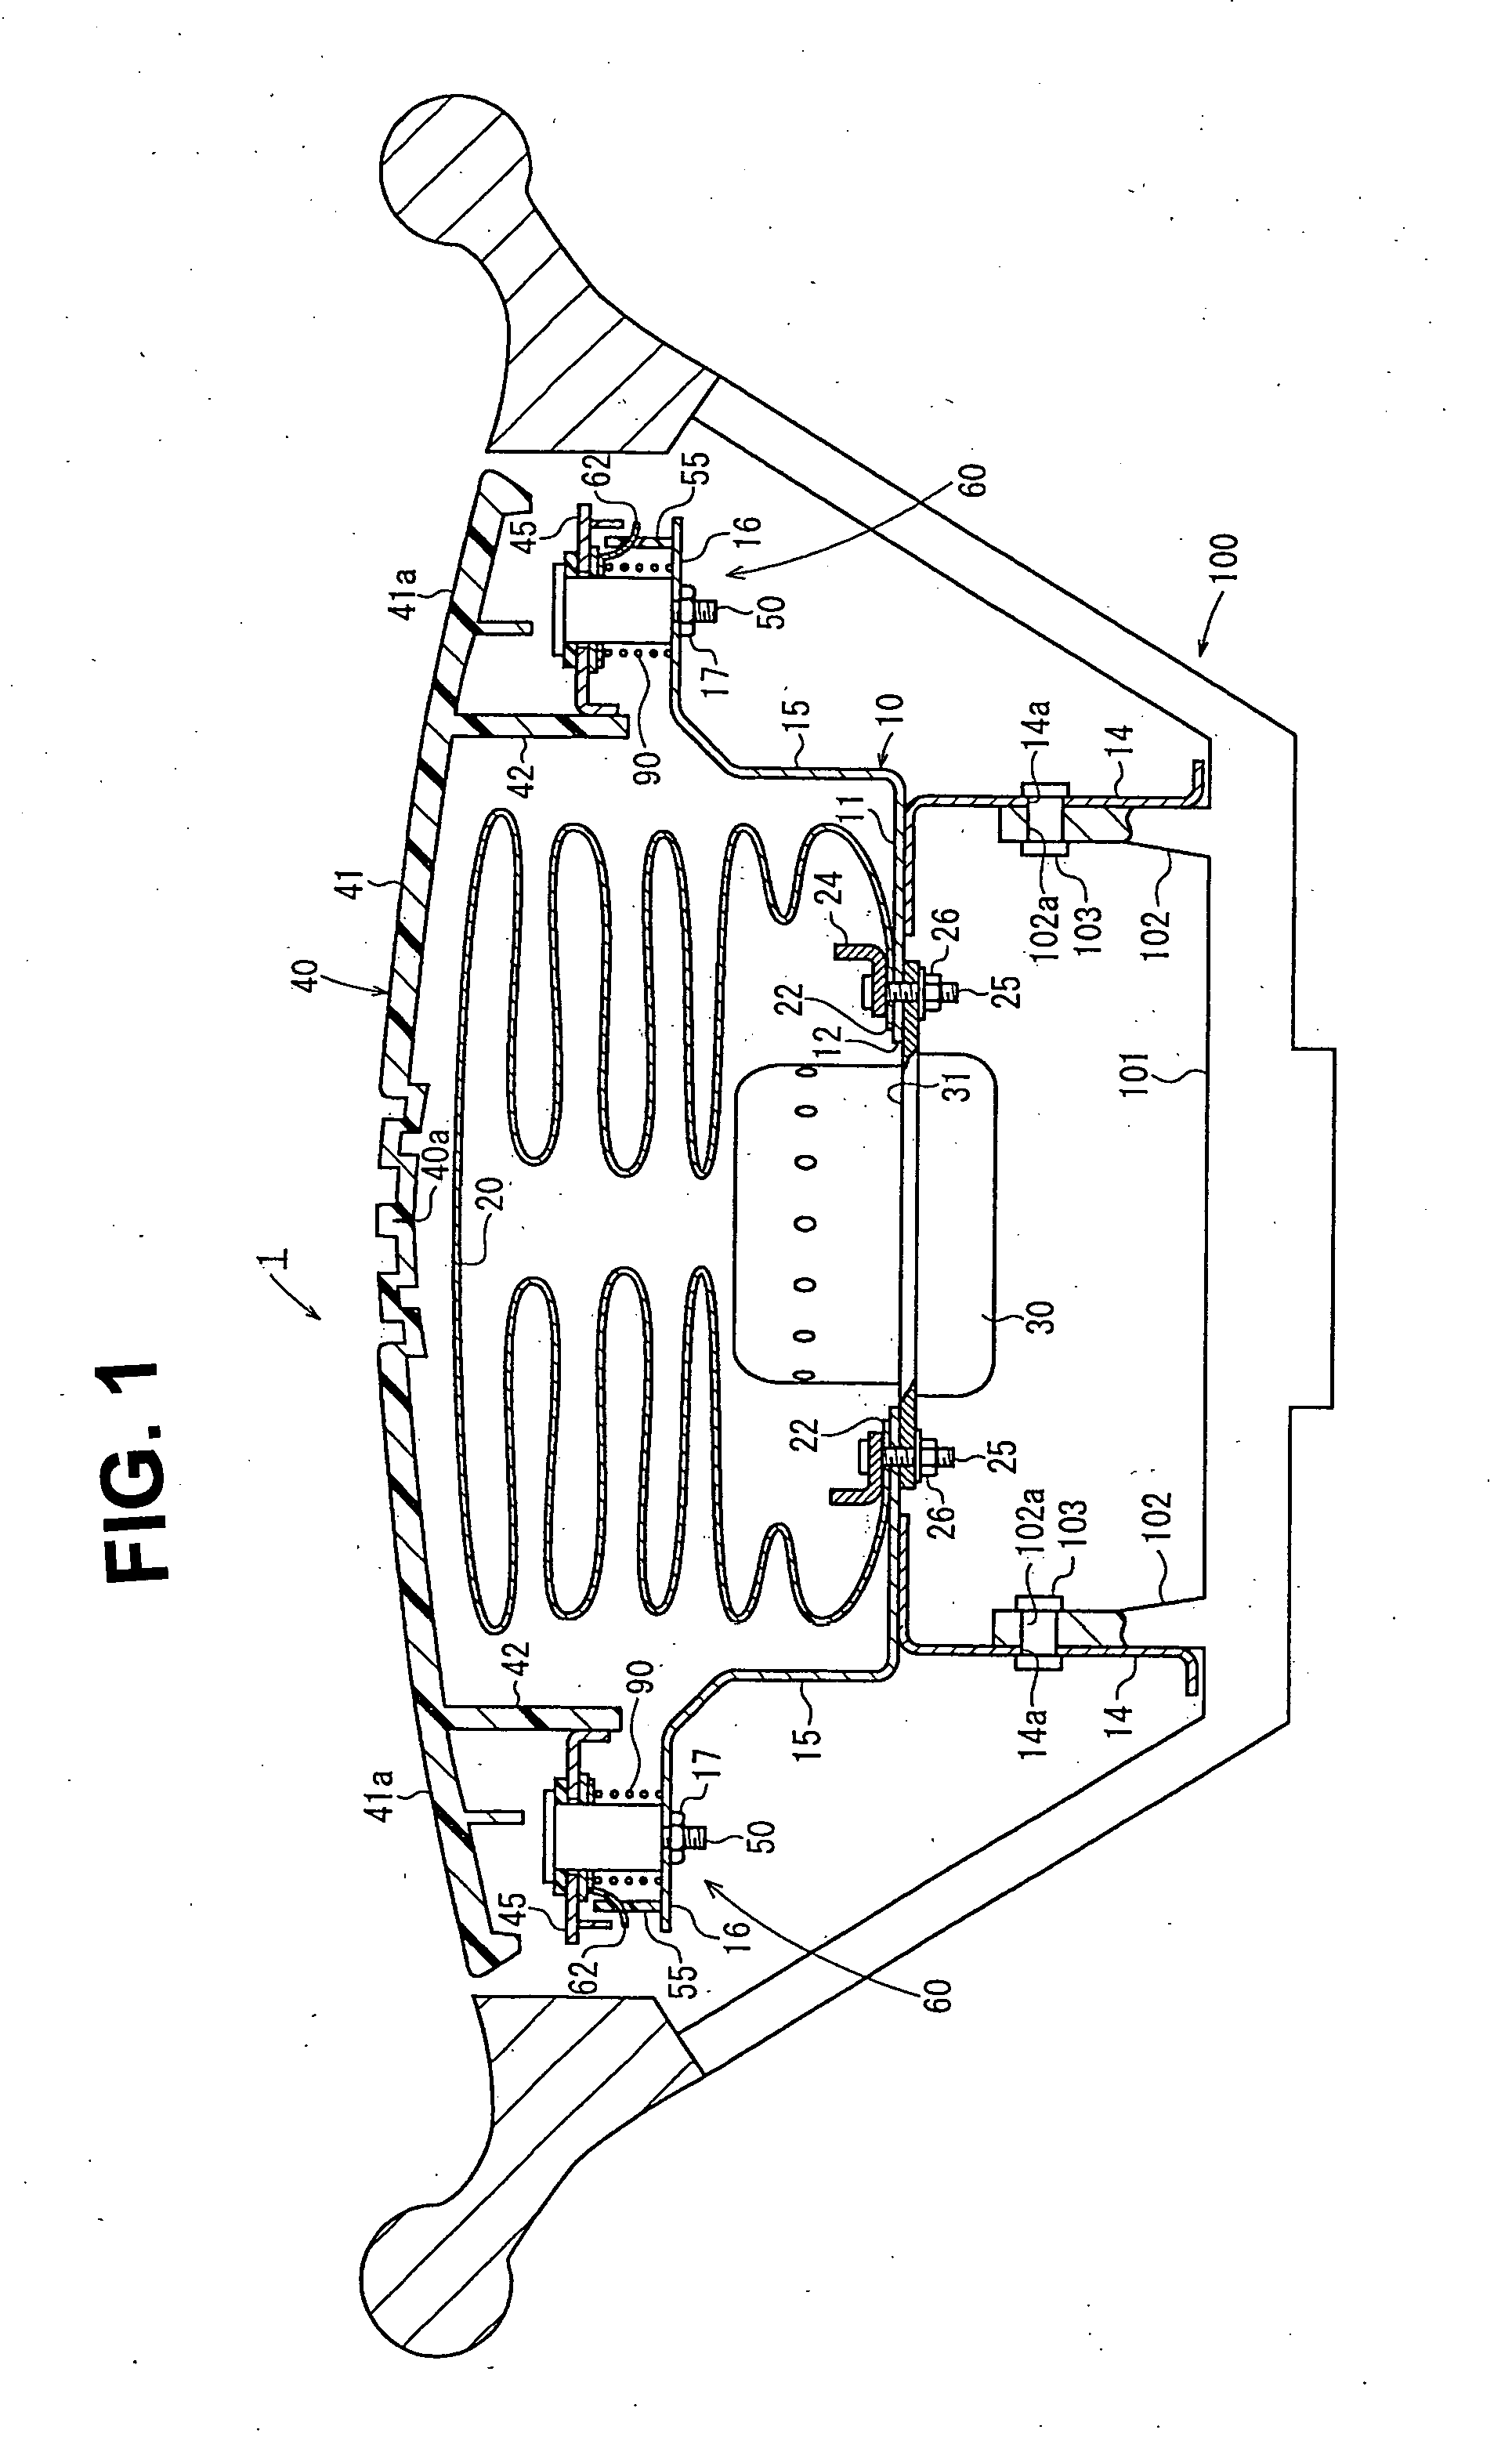 Horn switch device, airbag system, and steering wheel